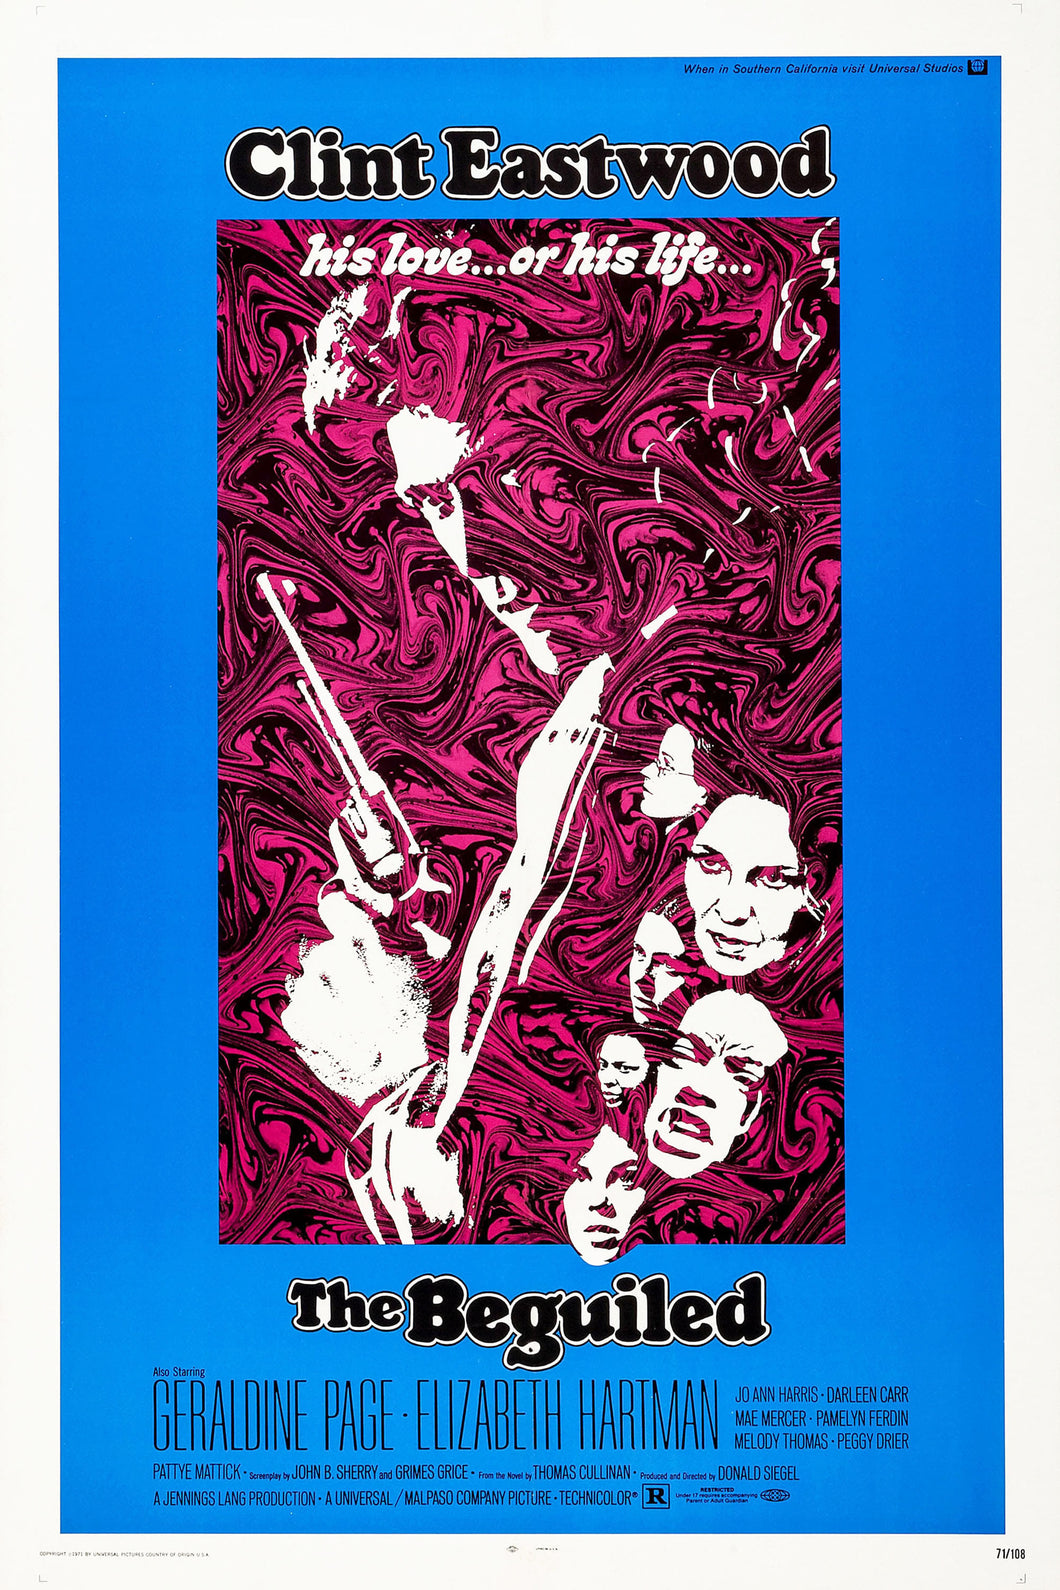 The Beguiled (1971) Movie Poster High Quality Glossy Paper A1 A2 A3 A4 A3 Framed or Unframed!!